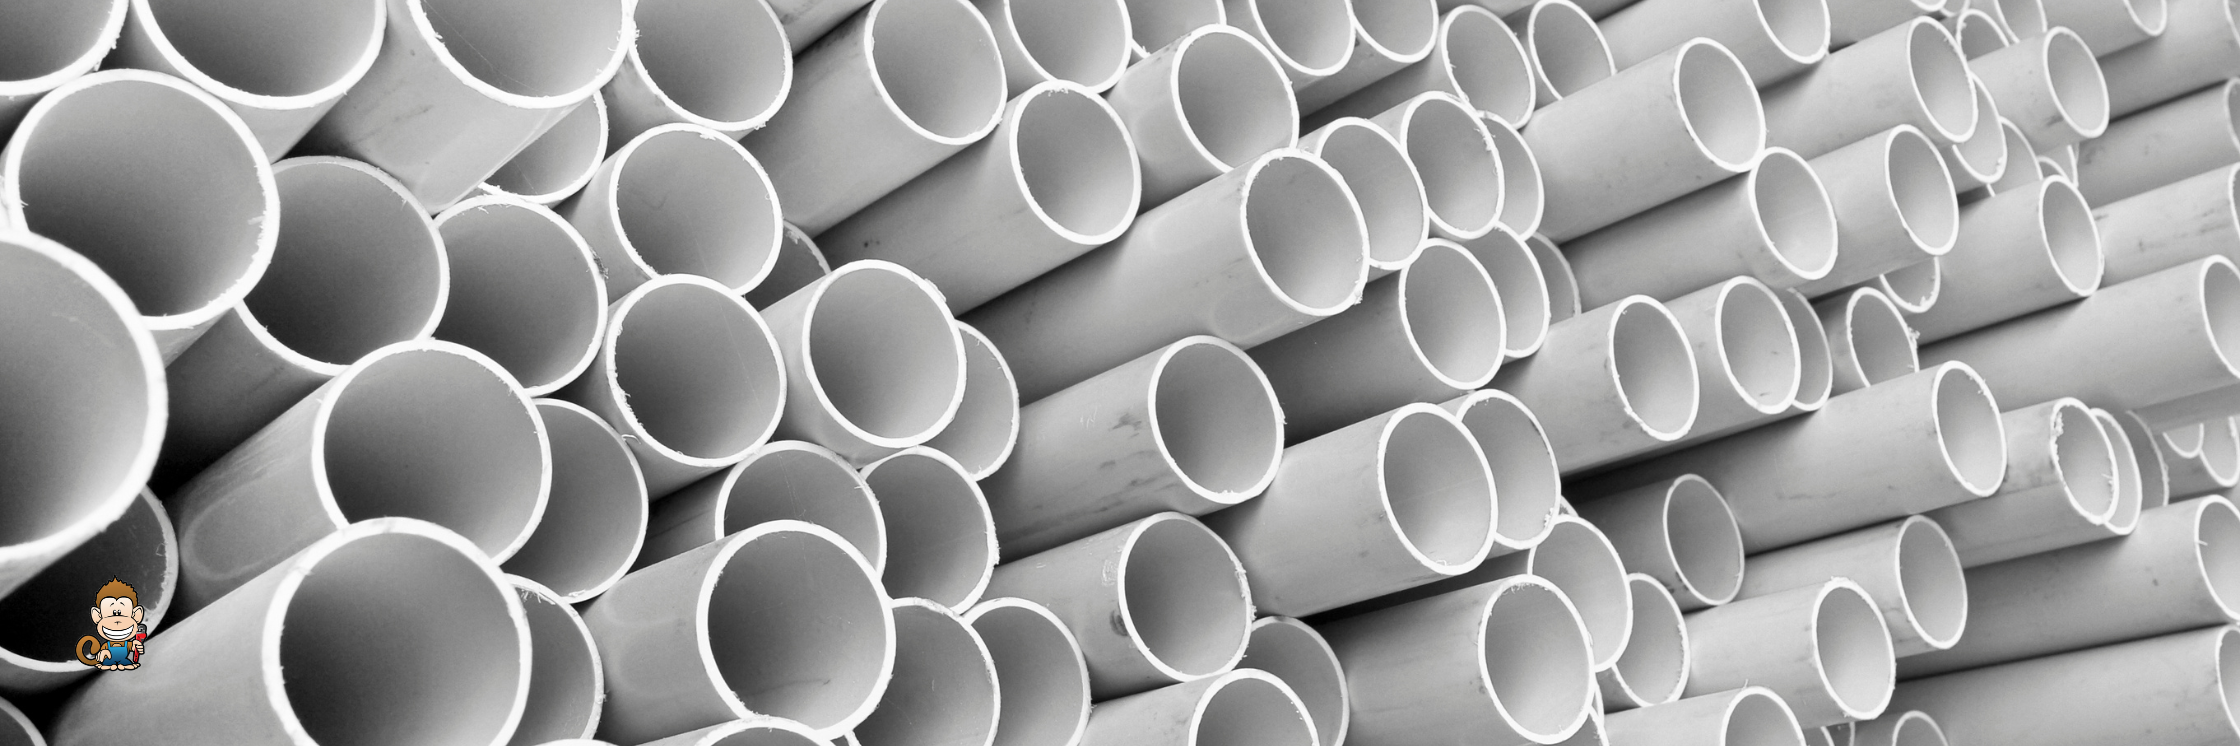 Pros and Cons of PVC Piping: The Superior Plumbing Pipe